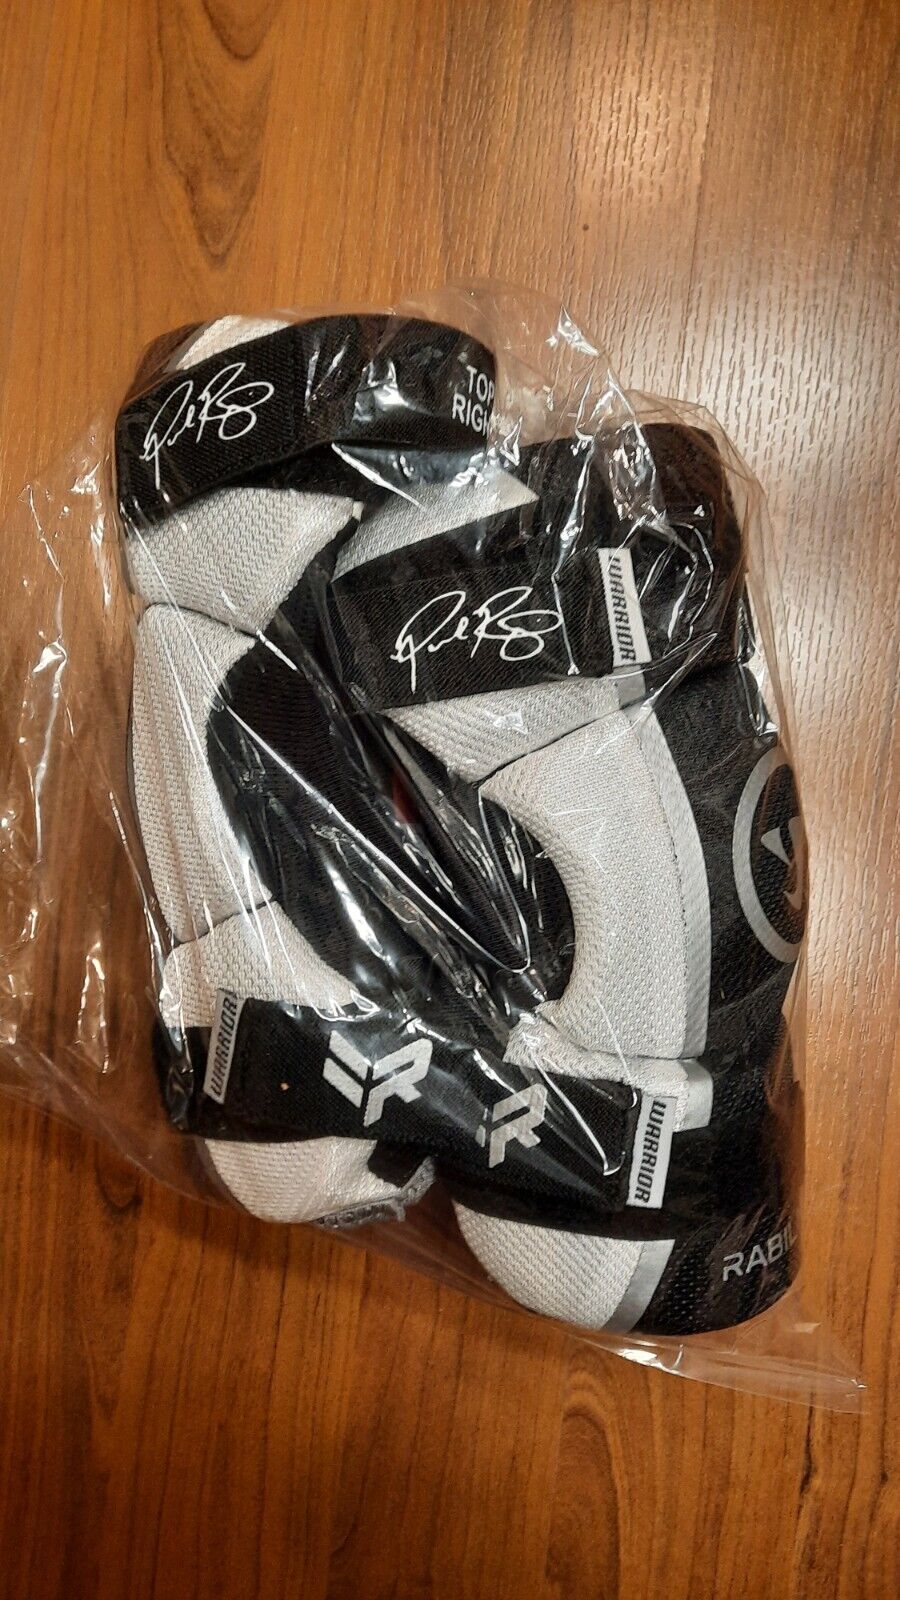 New Warrior Rabil Next Youth Small Lacrosse Arm Pad